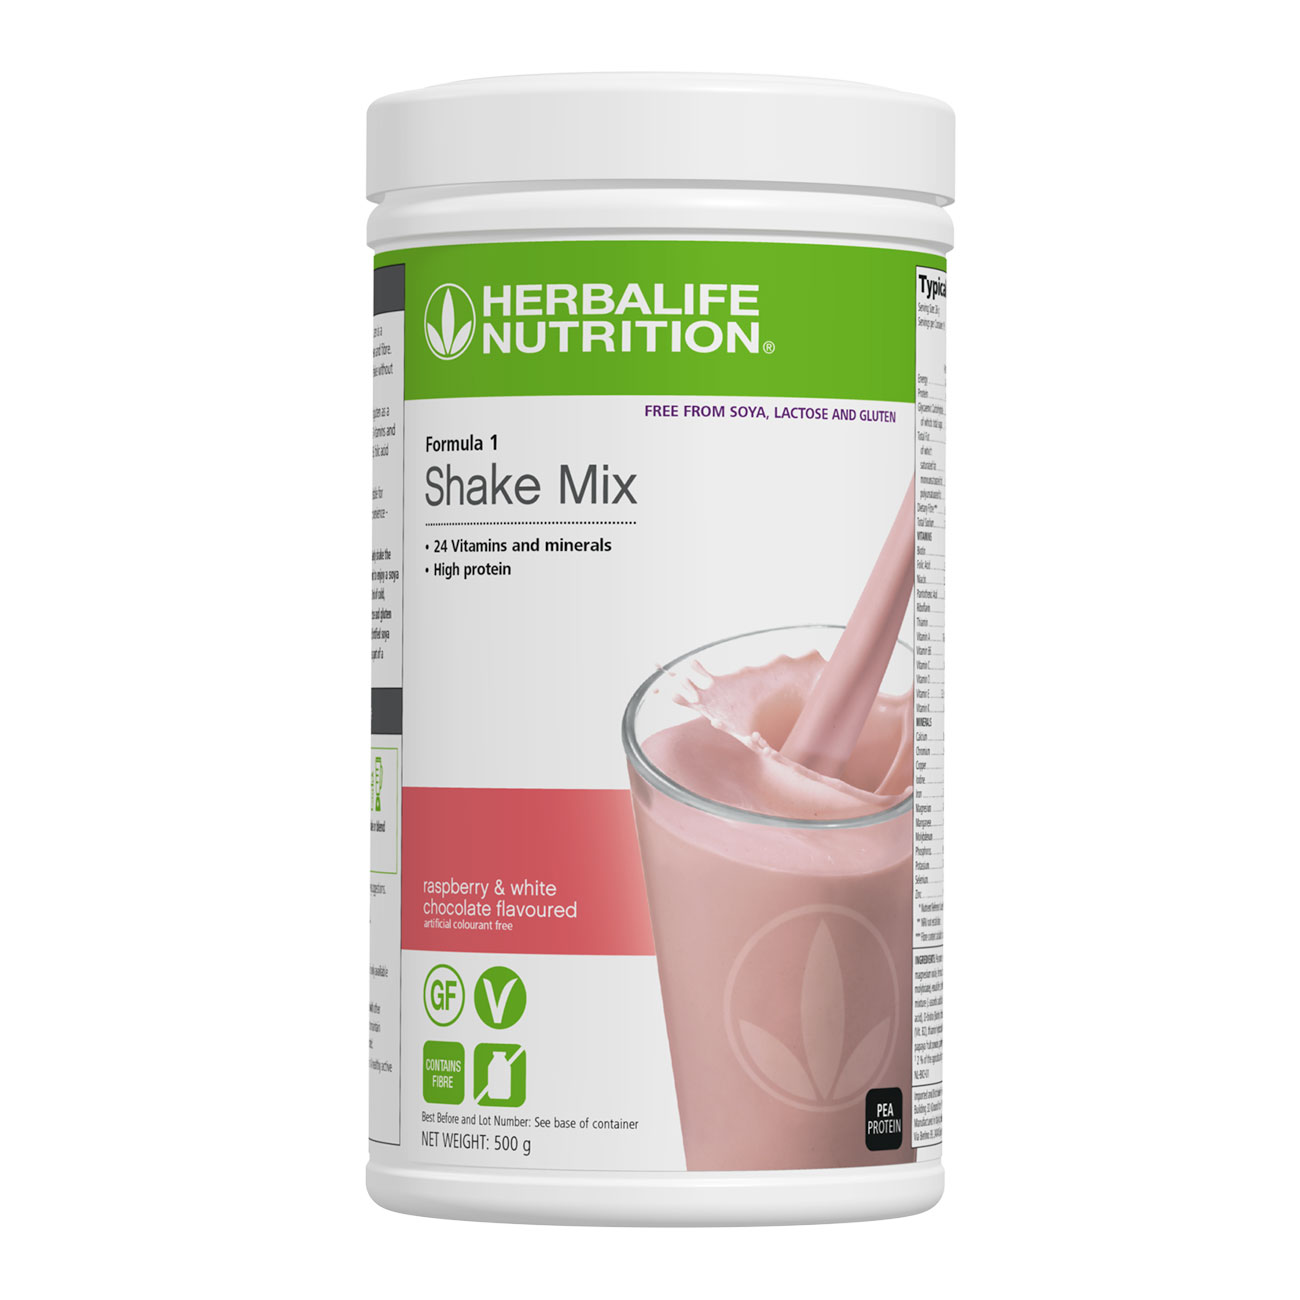 Formula 1 Free-From Protein Shake Raspberry and White Chocolate product shot.